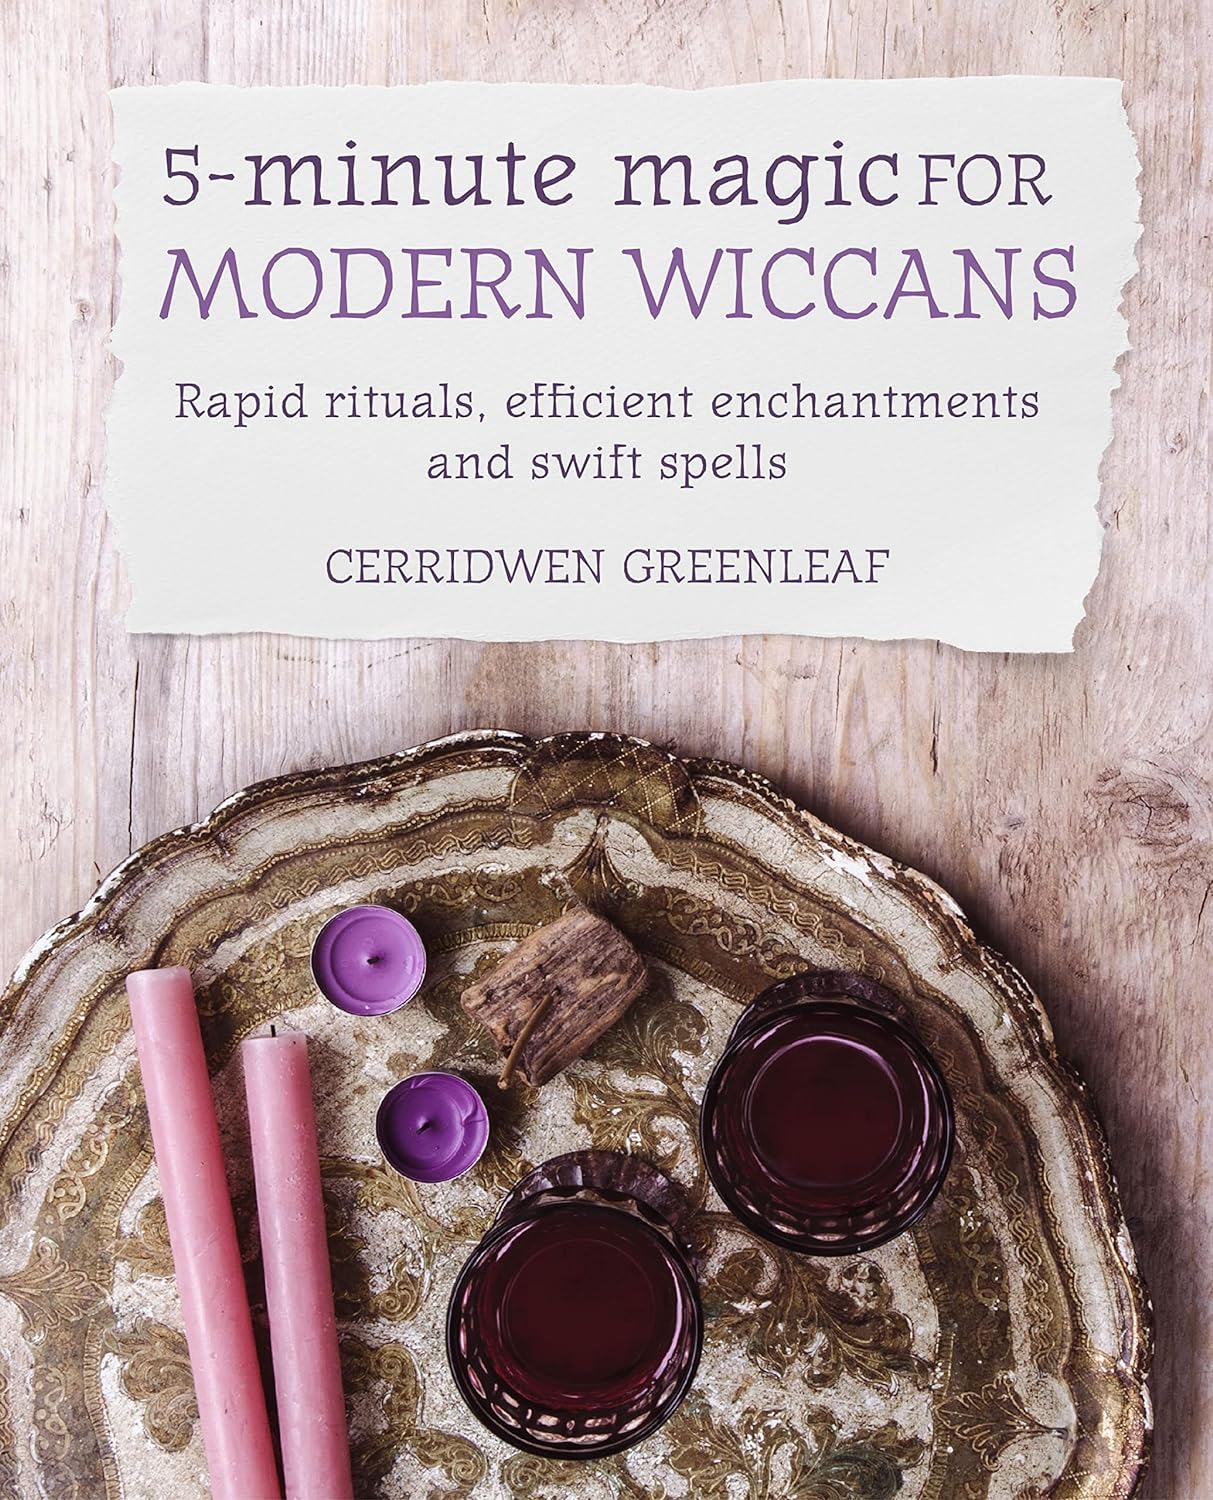 5-Minute Magic for Modern Wiccans: Rapid rituals, efficient enchantments, and swift spells - Cerridwen Greenleaf (Pre-Loved)